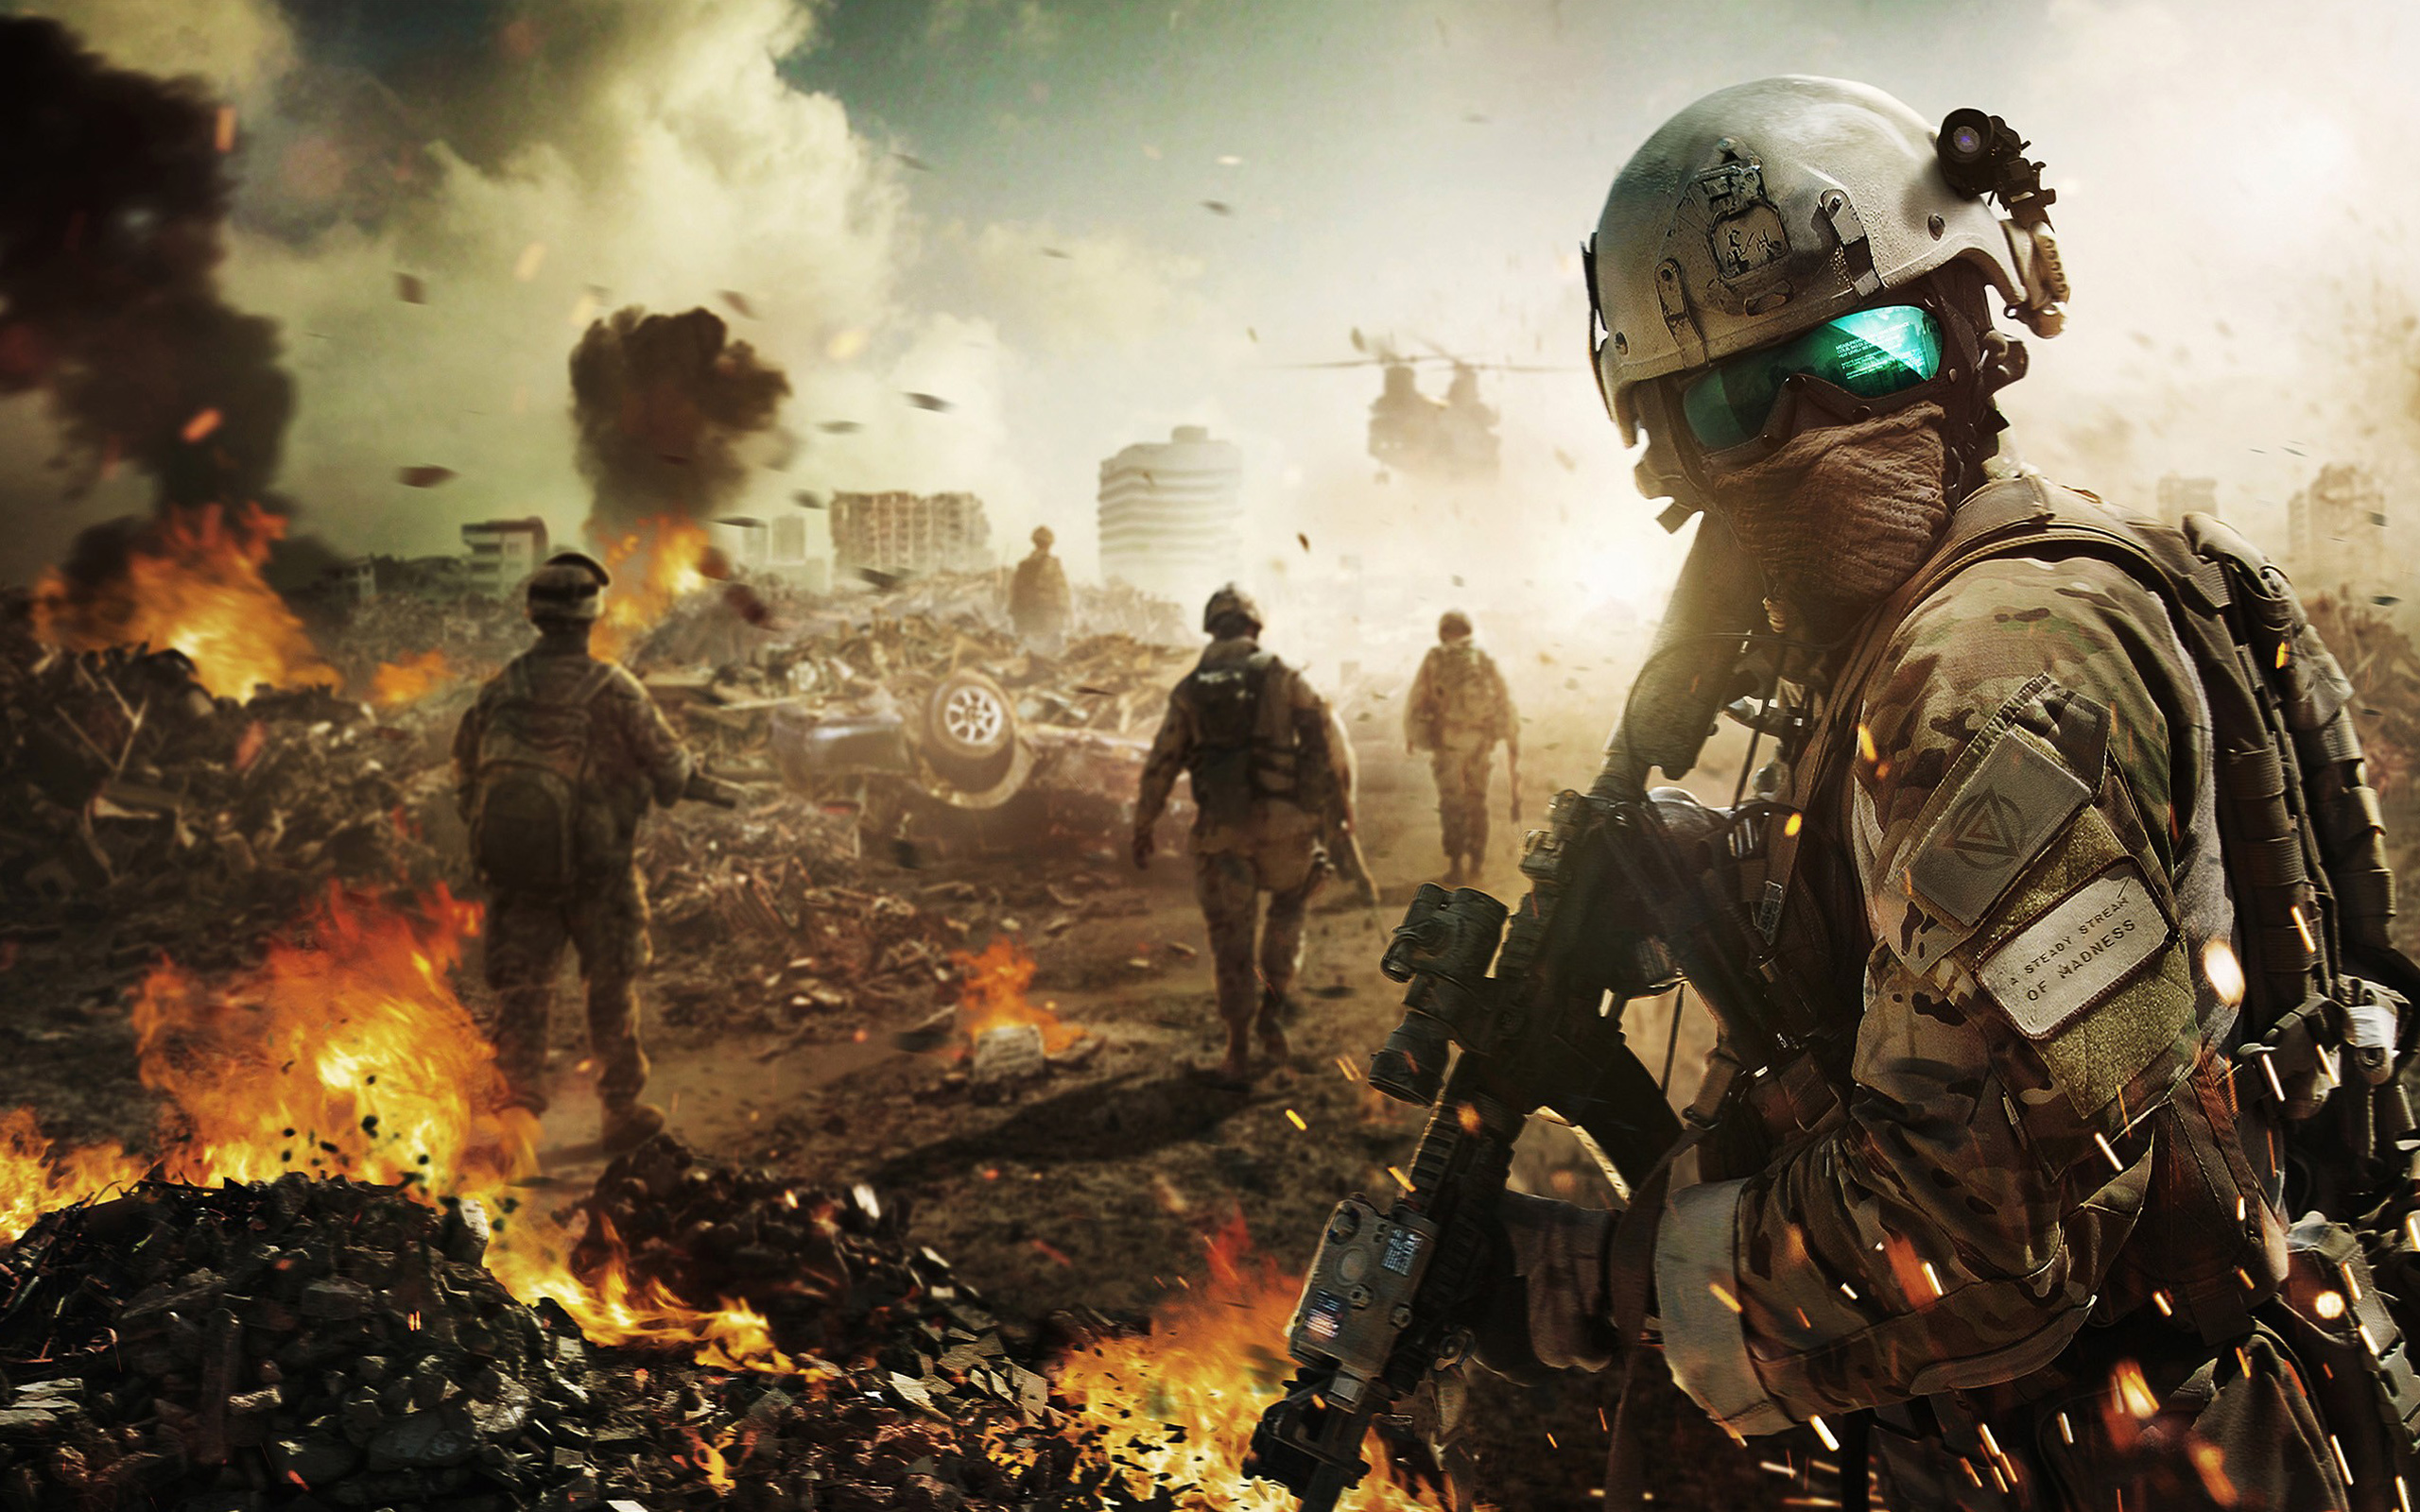 ghost, Recon, Graw, Soldiers, Fire, Military, Apocalyptic, Warrior, Sci fi Wallpaper